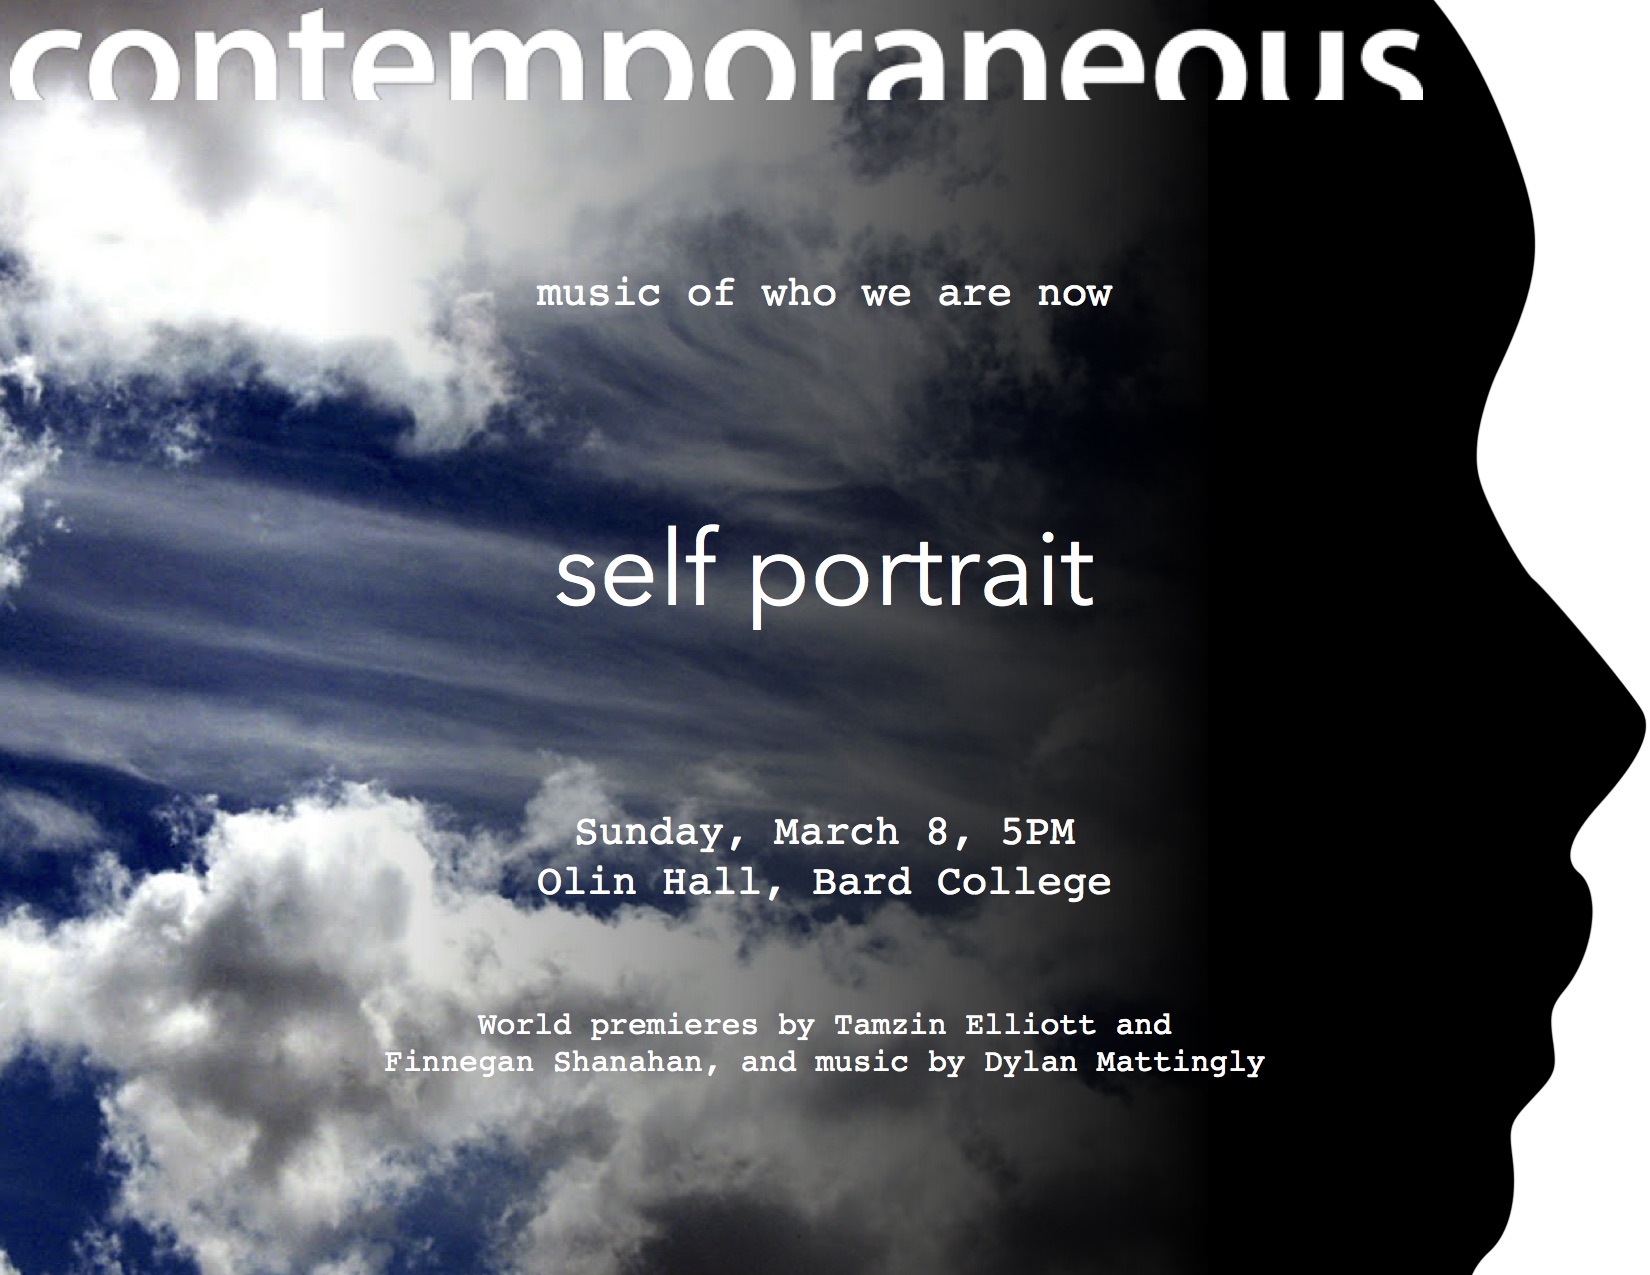 Visit http://www.contemporaneous.org/upcoming-events/2015/3/7/self-portrait